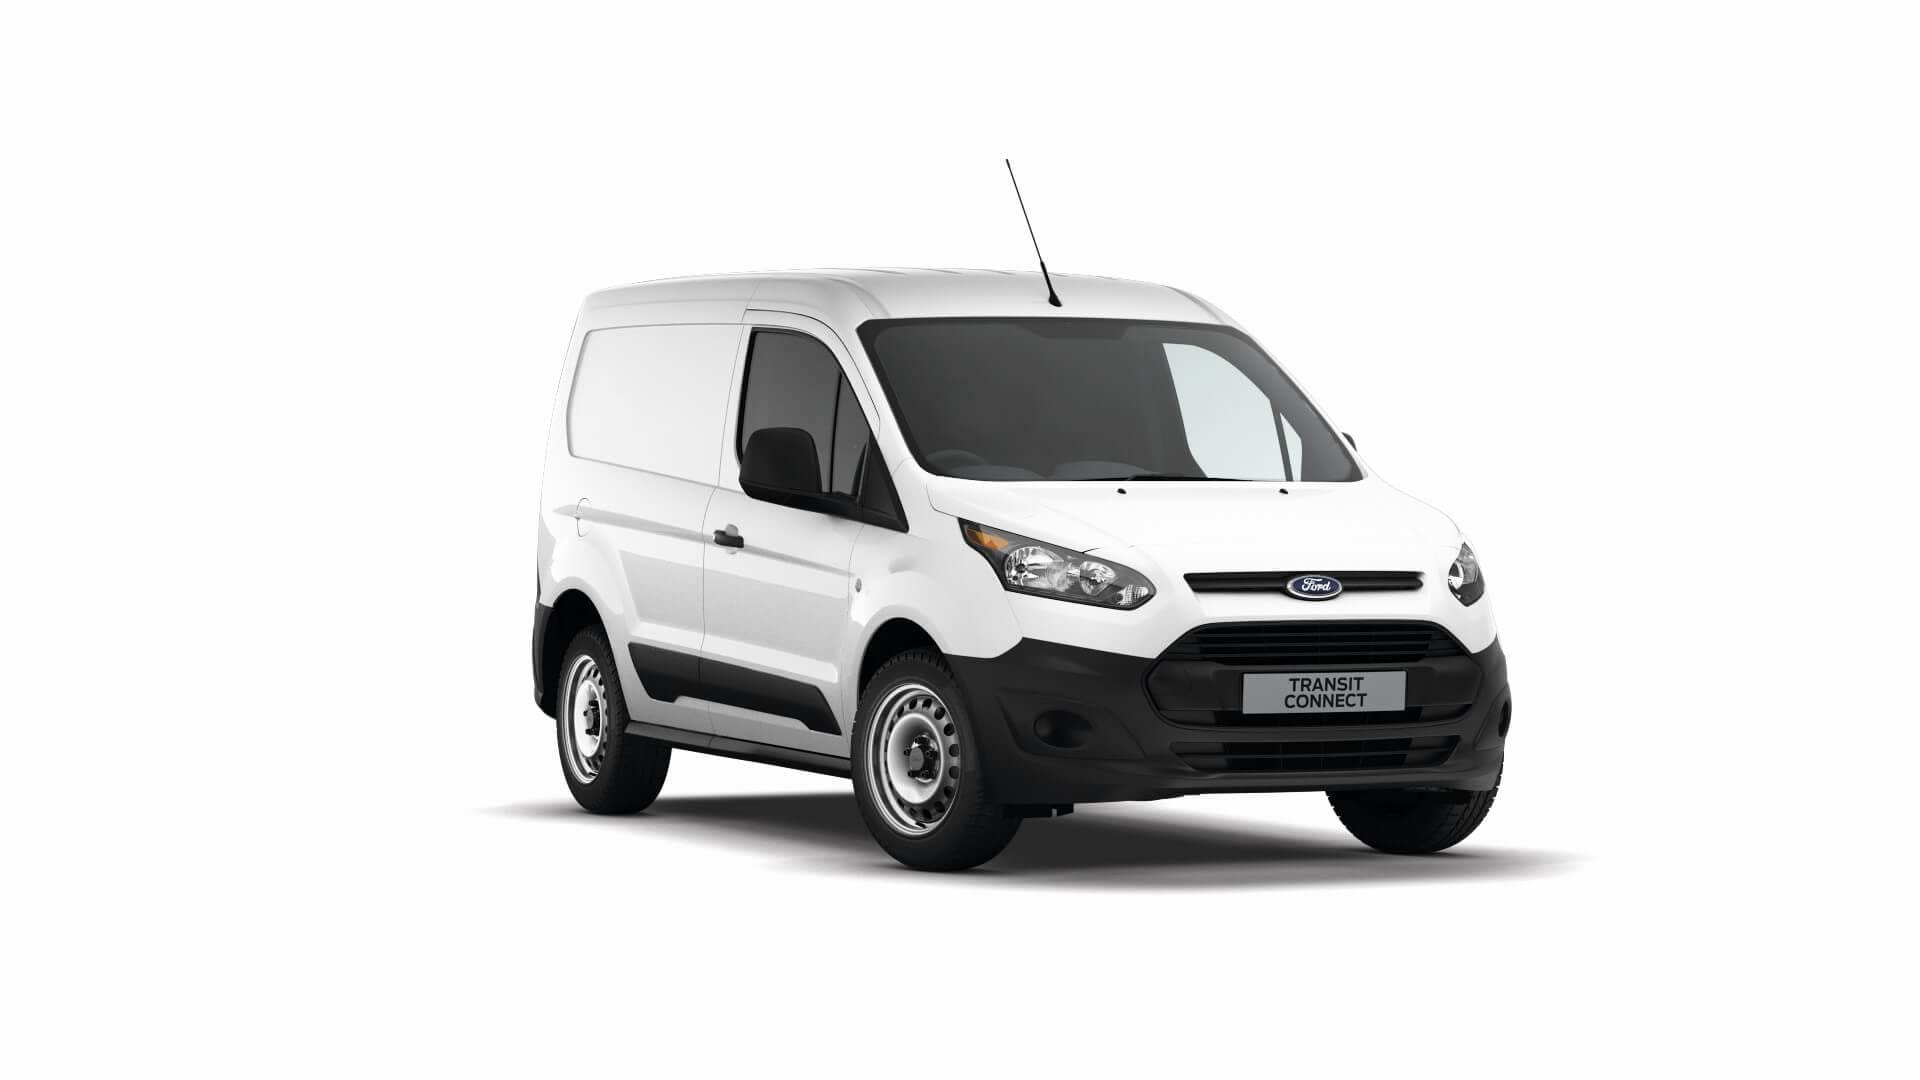 Rent Small Vans | Northgate Vehicle Hire